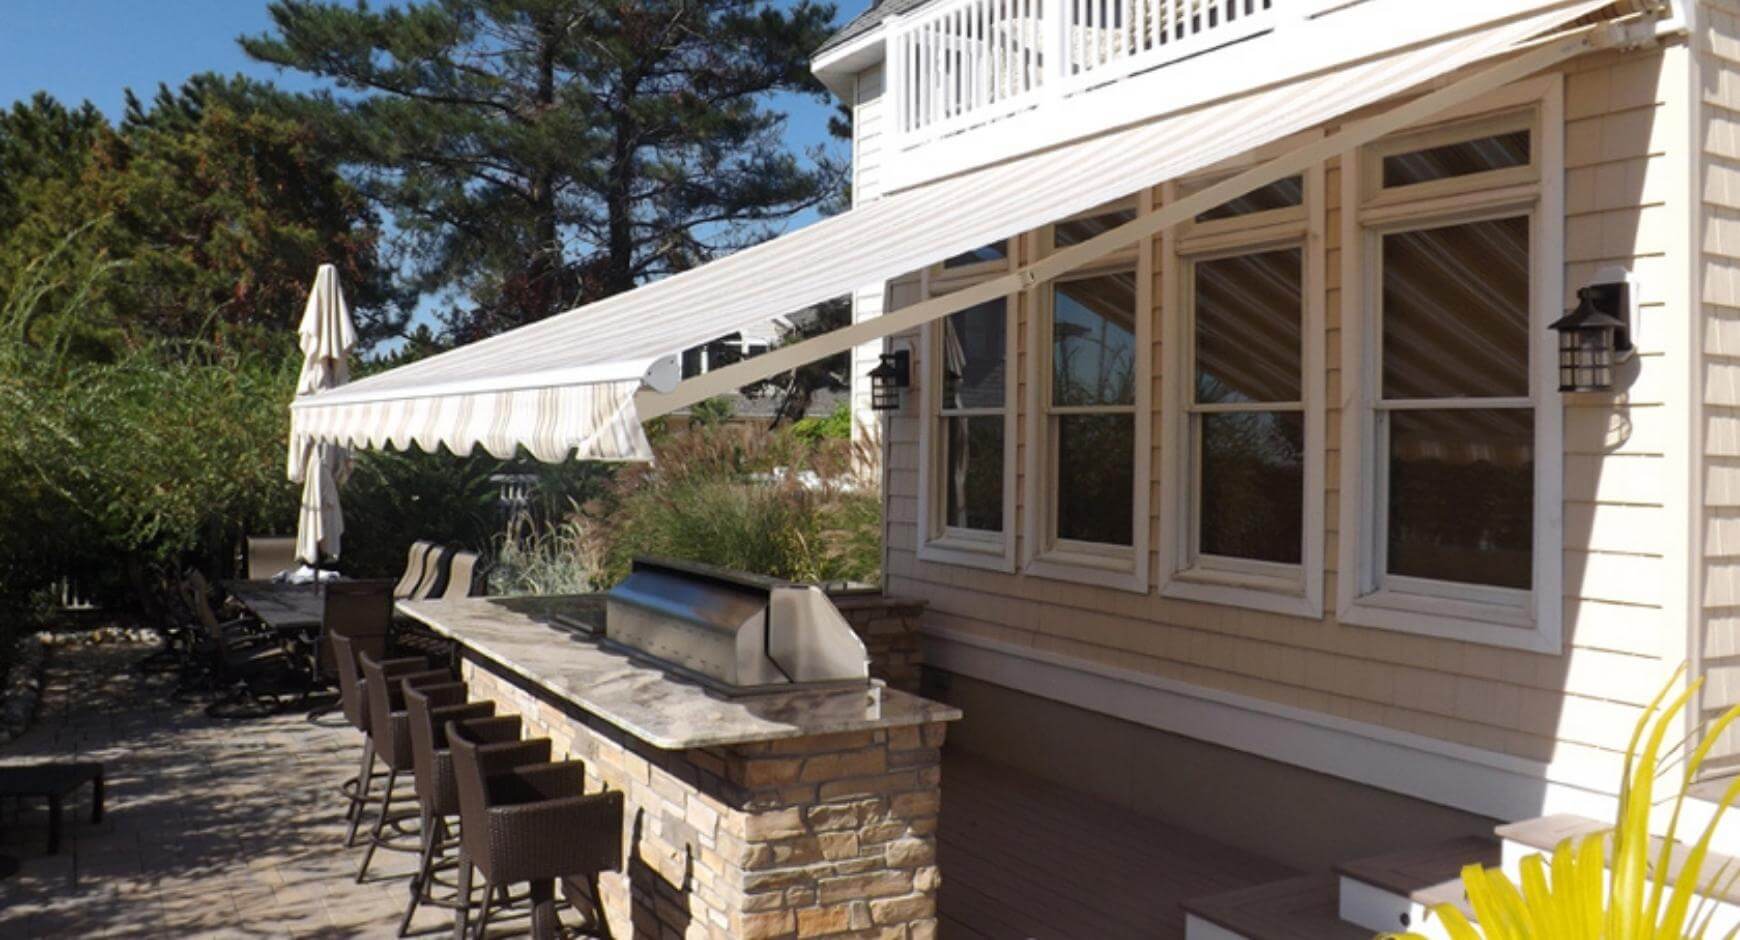 Awning covered outdoor bar and grill